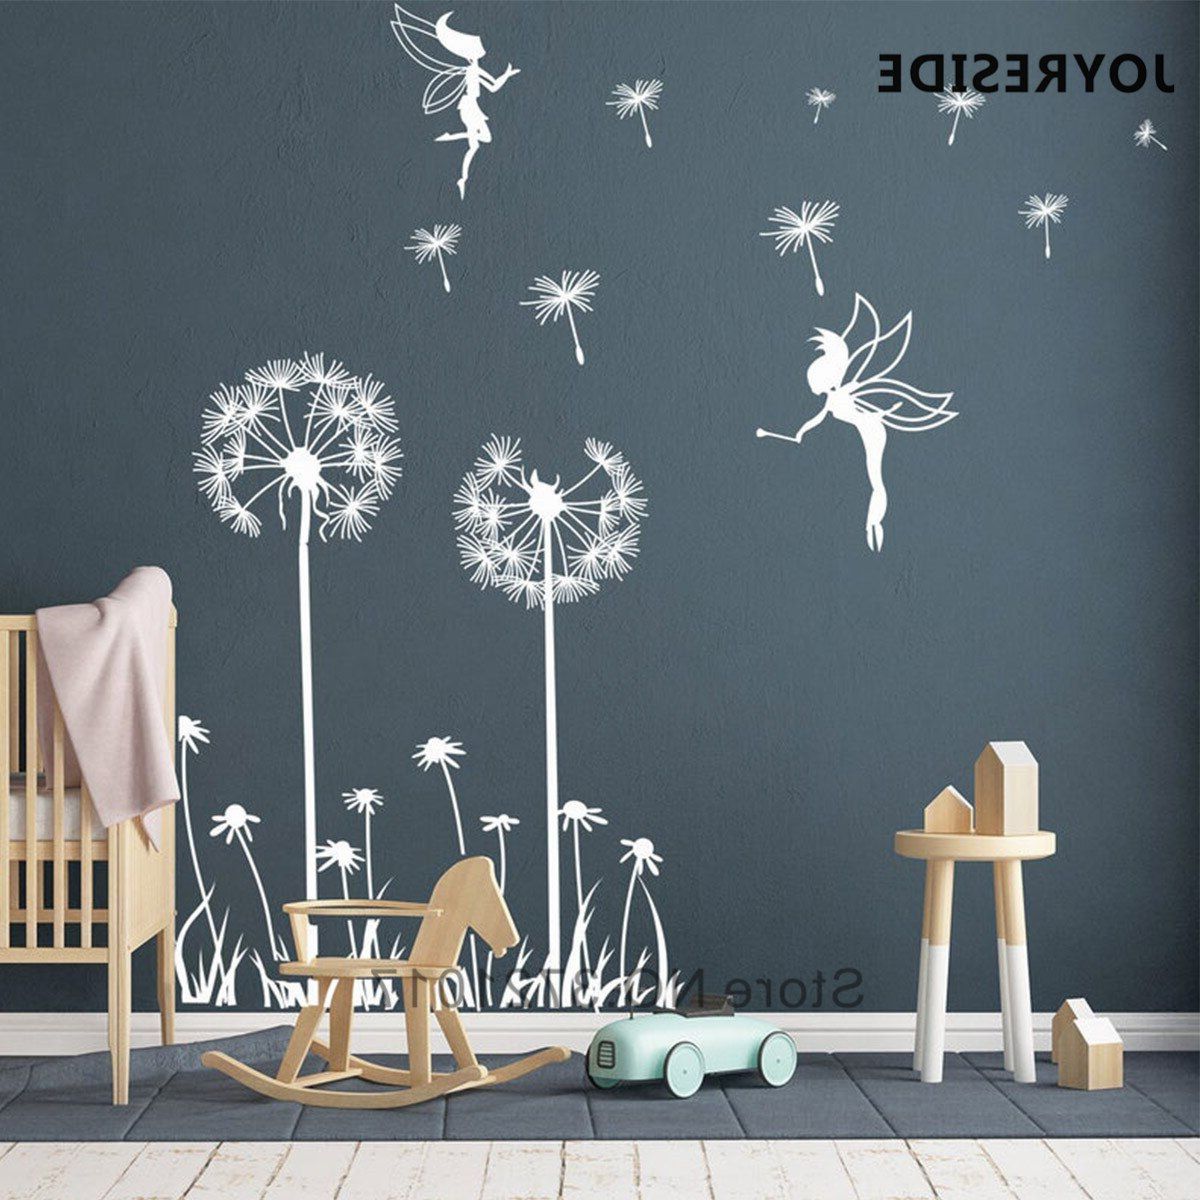 Dandelion Wall Decal Fairy Flying Magic Wall Stickers Homegirls Room Decor  Flower Vinyl Wallpaper Decals Fly Dandelion M305 – Wall Stickers –  Aliexpress Within Most Current Flying Dandelion Wall Art (View 15 of 15)